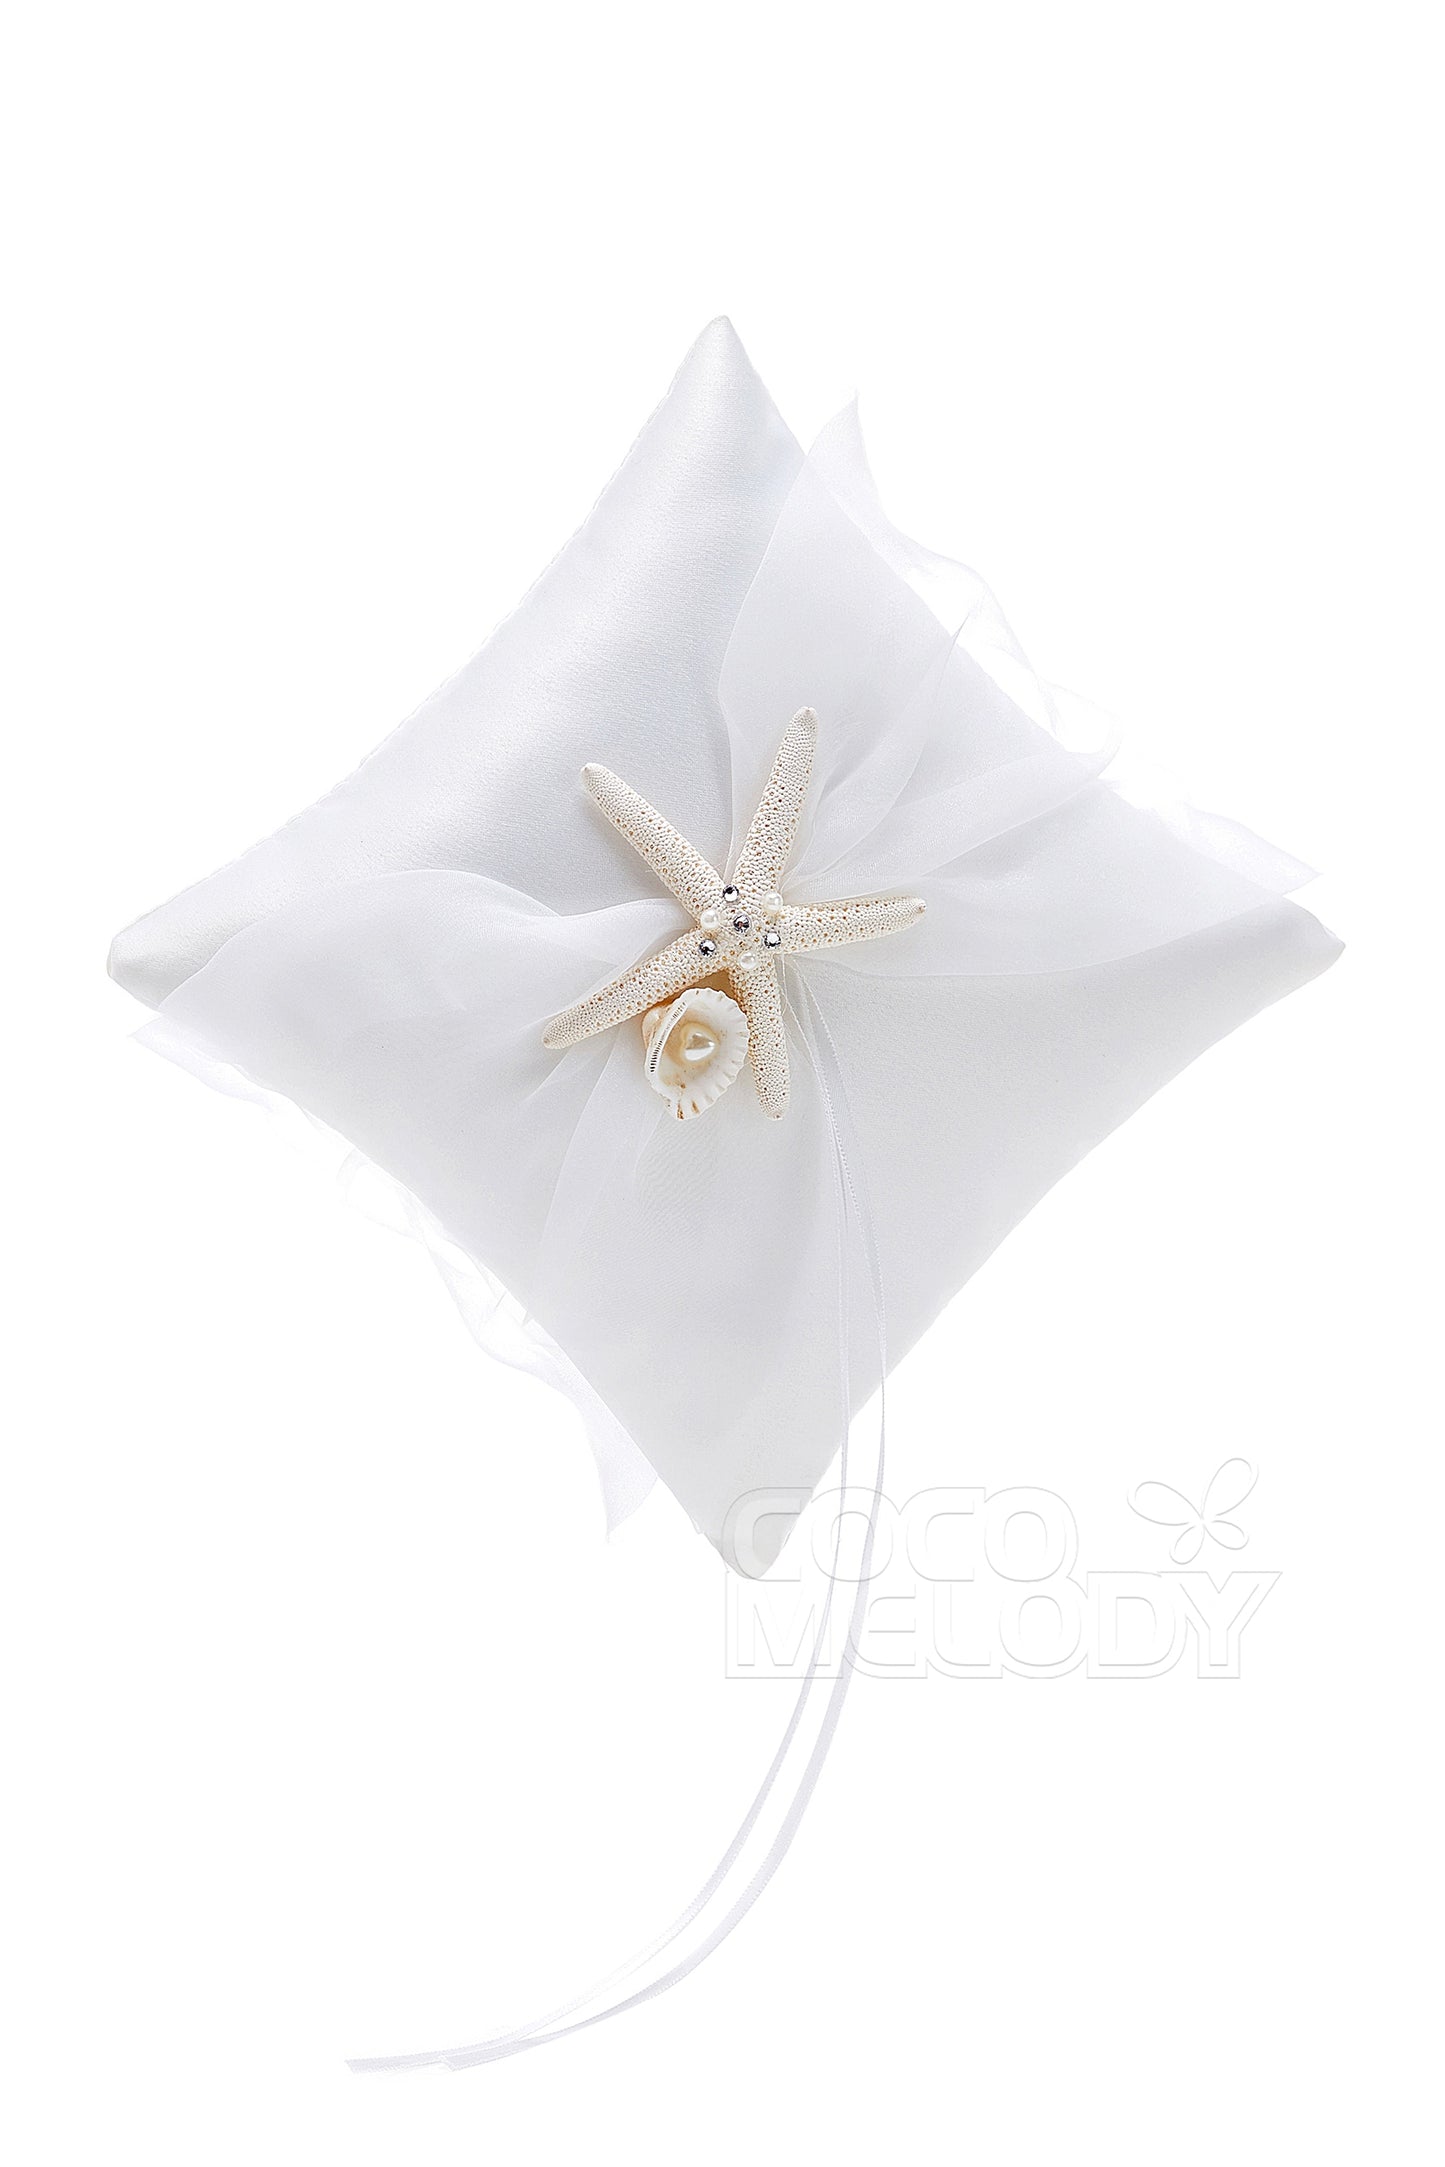 Satin Wedding Ring Pillow with Pearls CZ0202